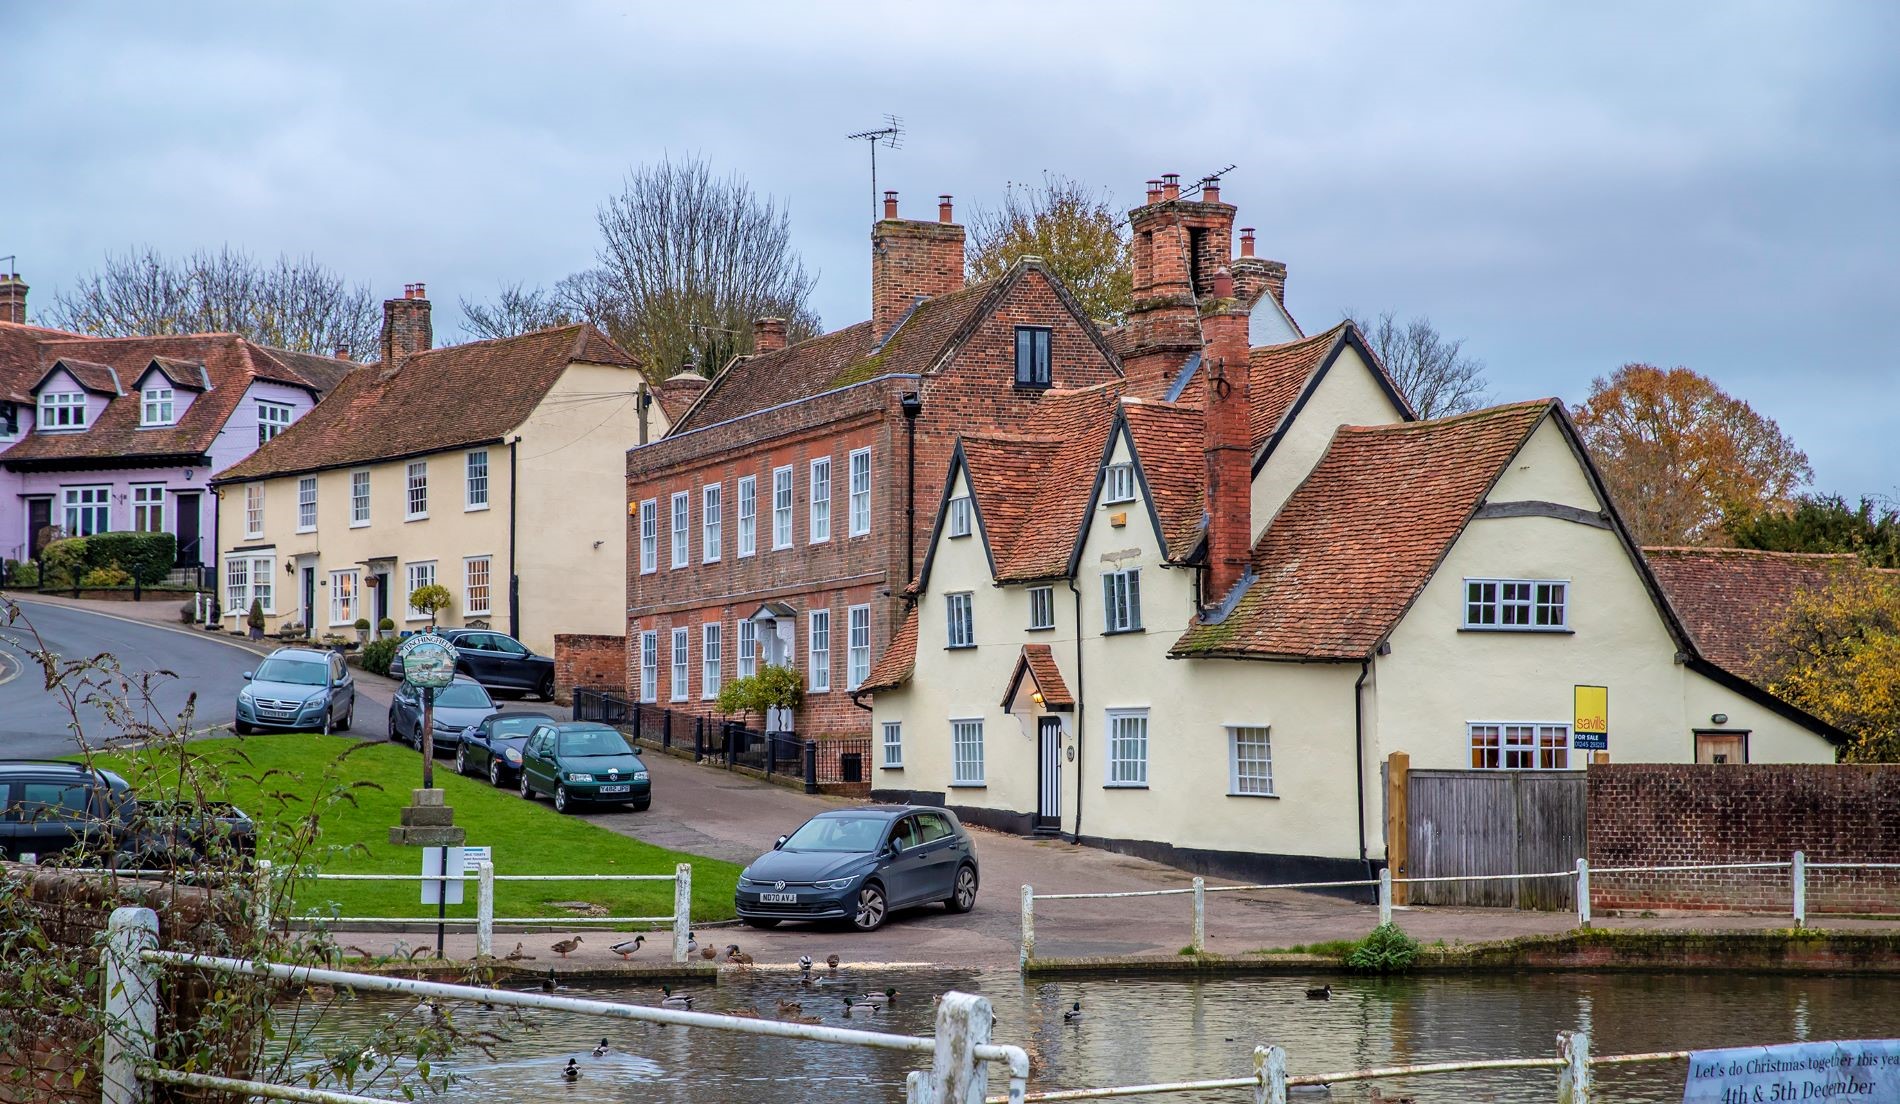 Houses in the village of Finchingfield